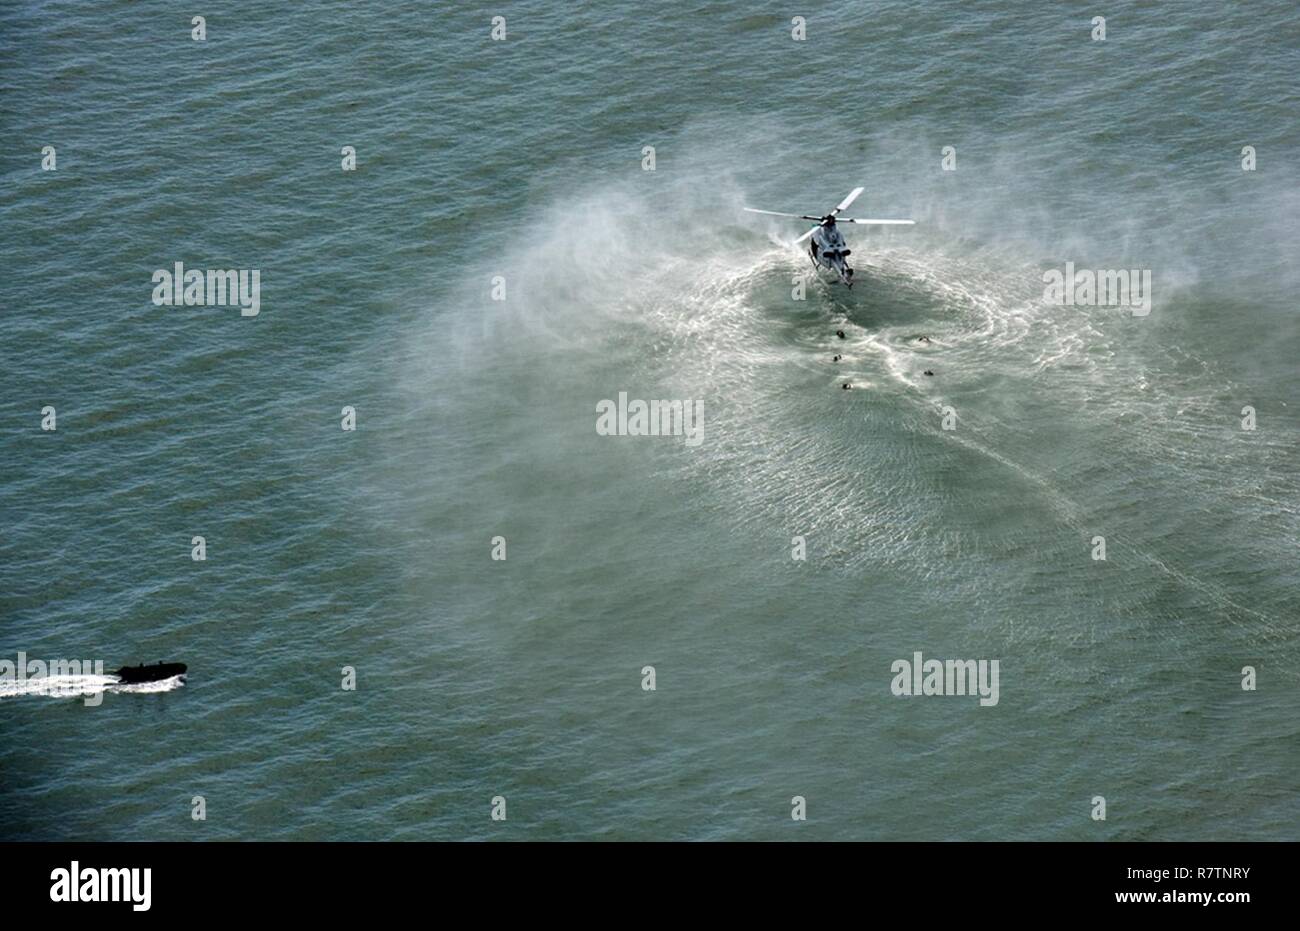 Helo Jump High Resolution Stock Photography And Images Alamy